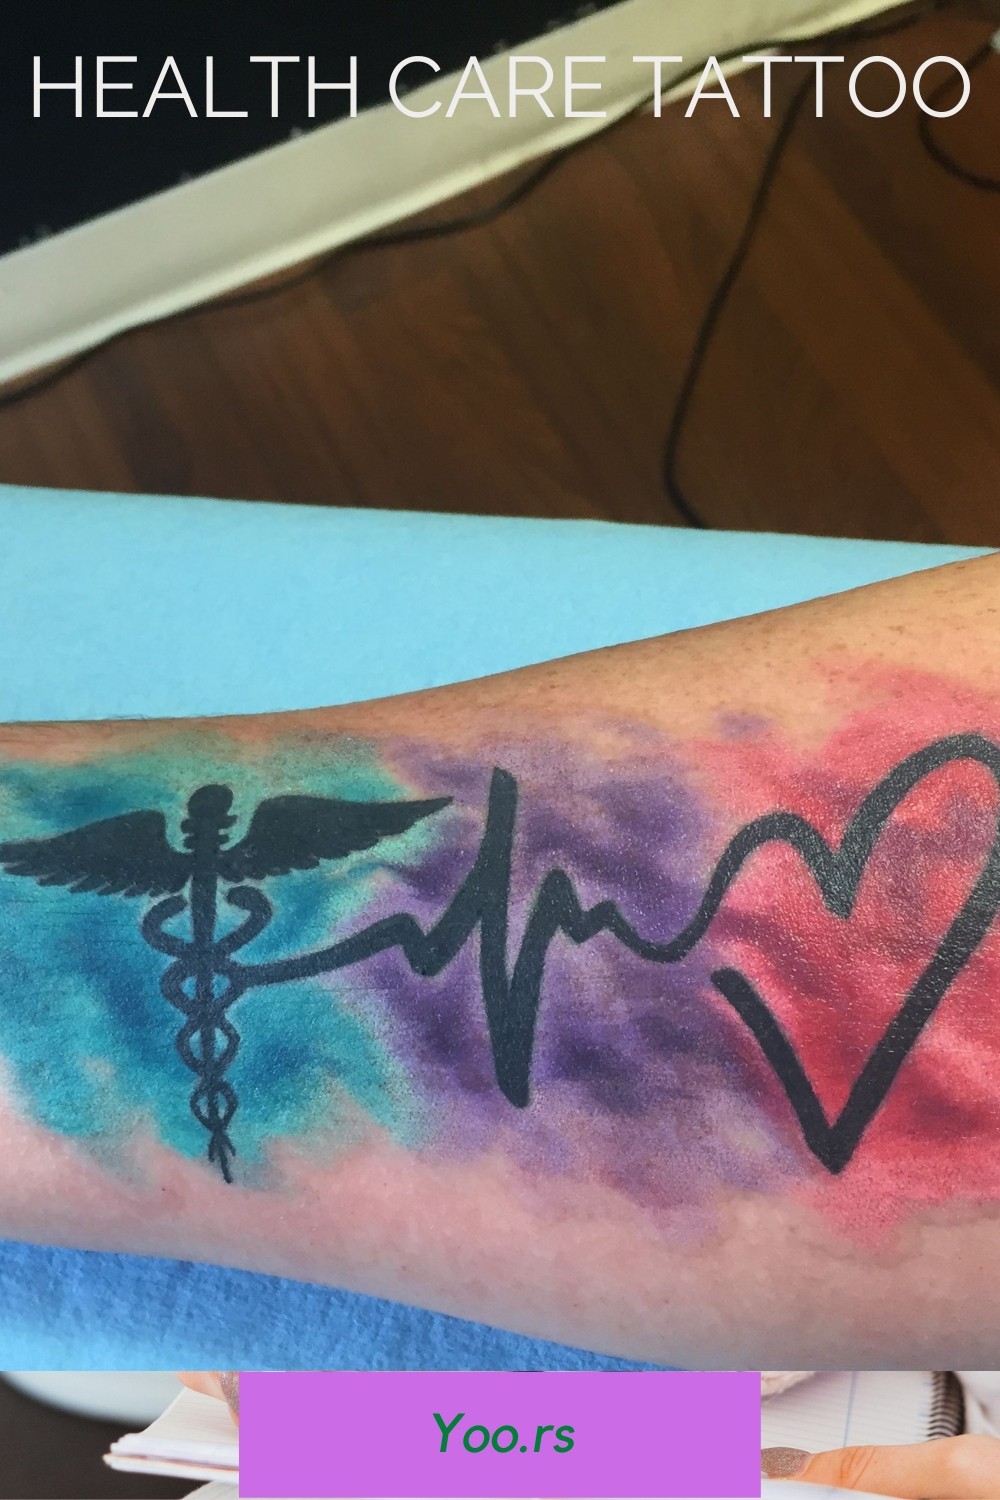 Explained: How A South Korean Developed Electronic Tattoo To Monitor  Healthcare